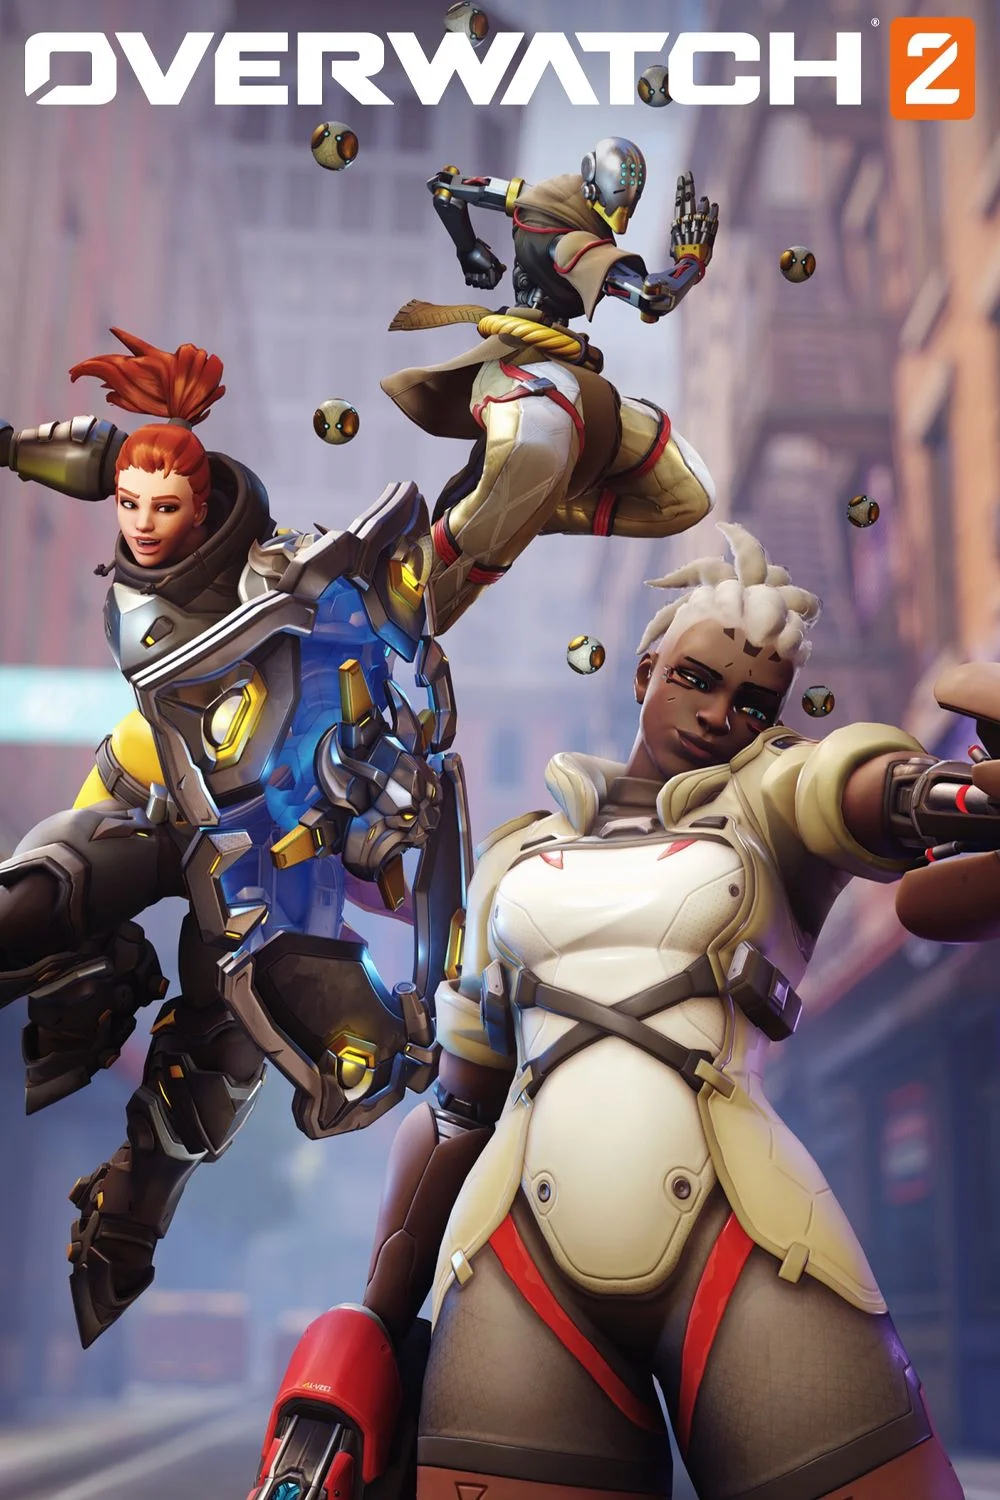 Overwatch 2's Season 9 Update Sparks Controversy: Game Director Apologizes for Miscommunication